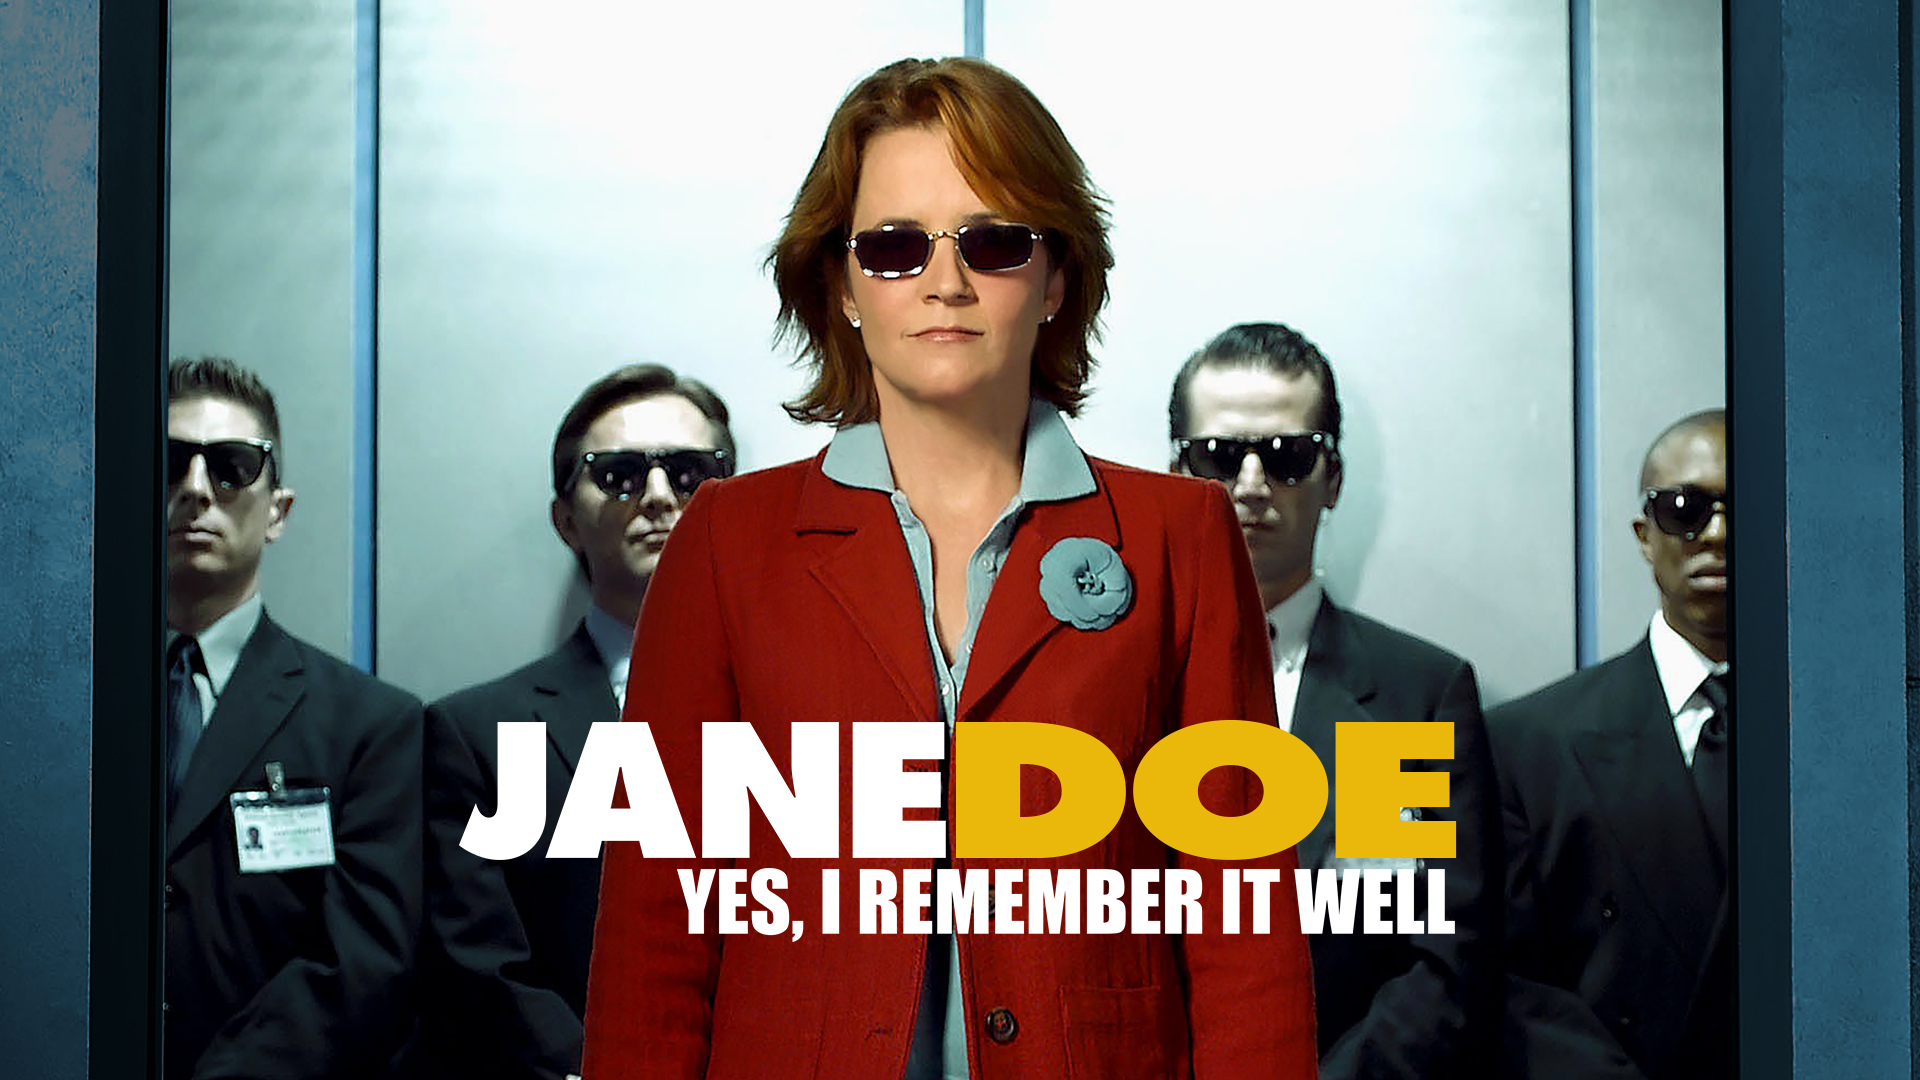 Jane Doe: Yes I Remember It Well